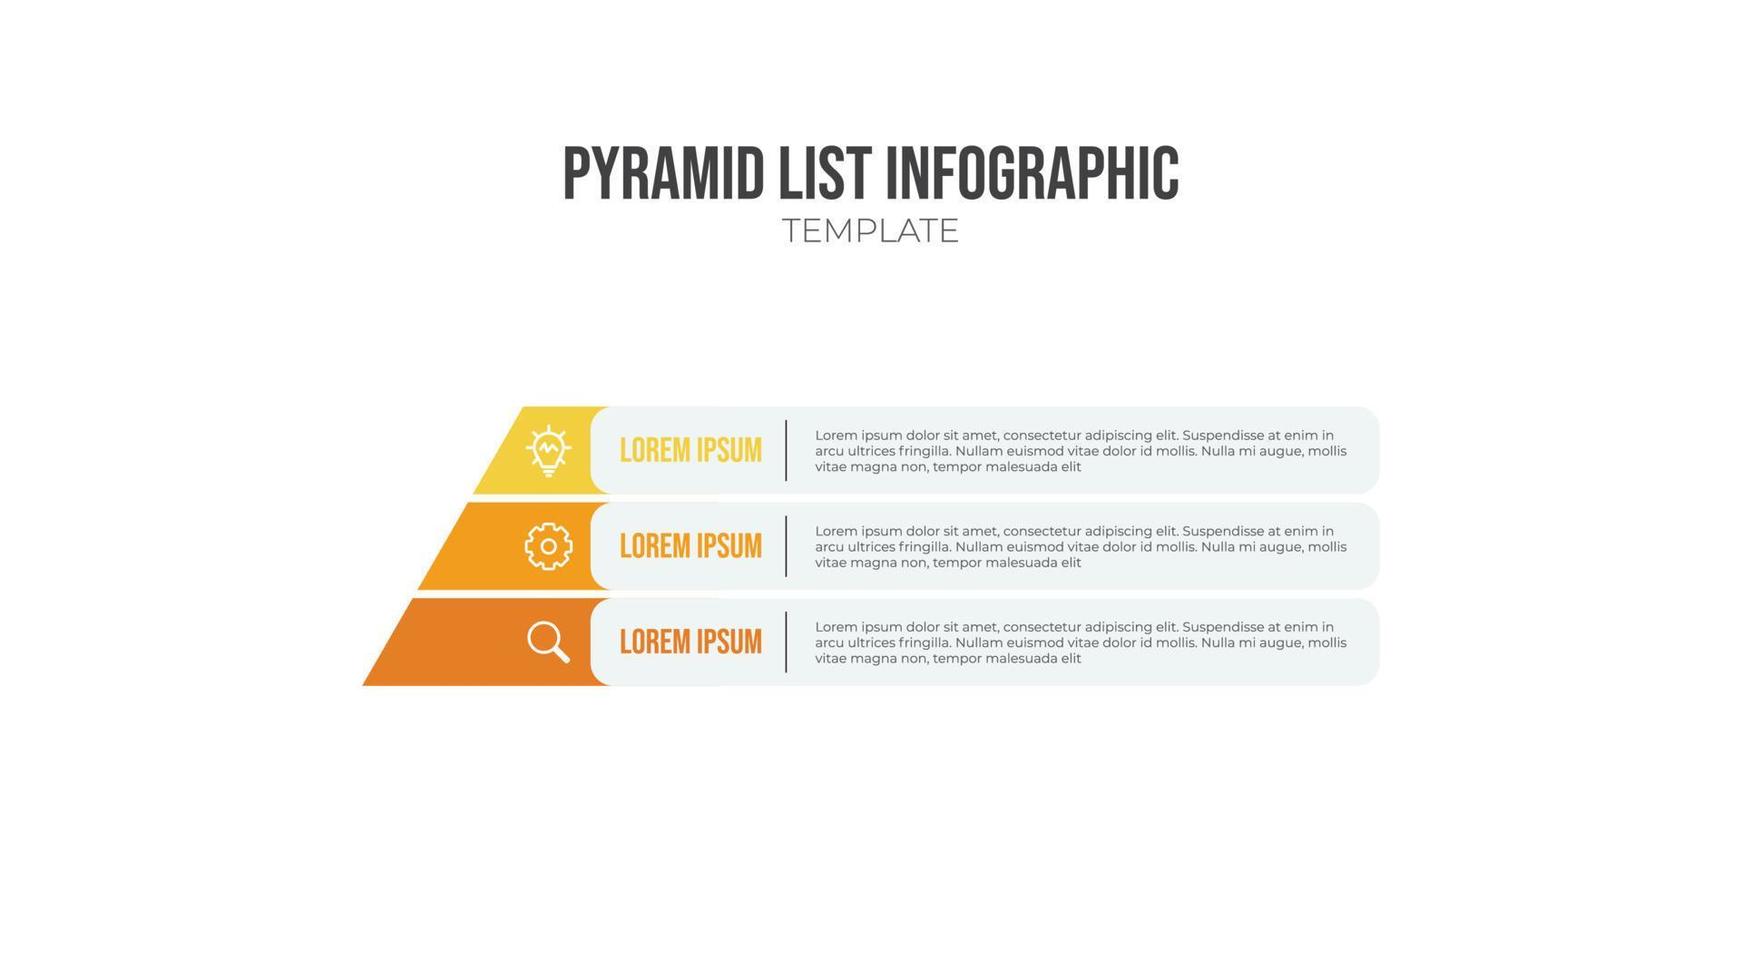 Pyramid list infographic element vector, 3 list template with icons. Use to show proportional, interconnected, or hierarchical relationships. vector